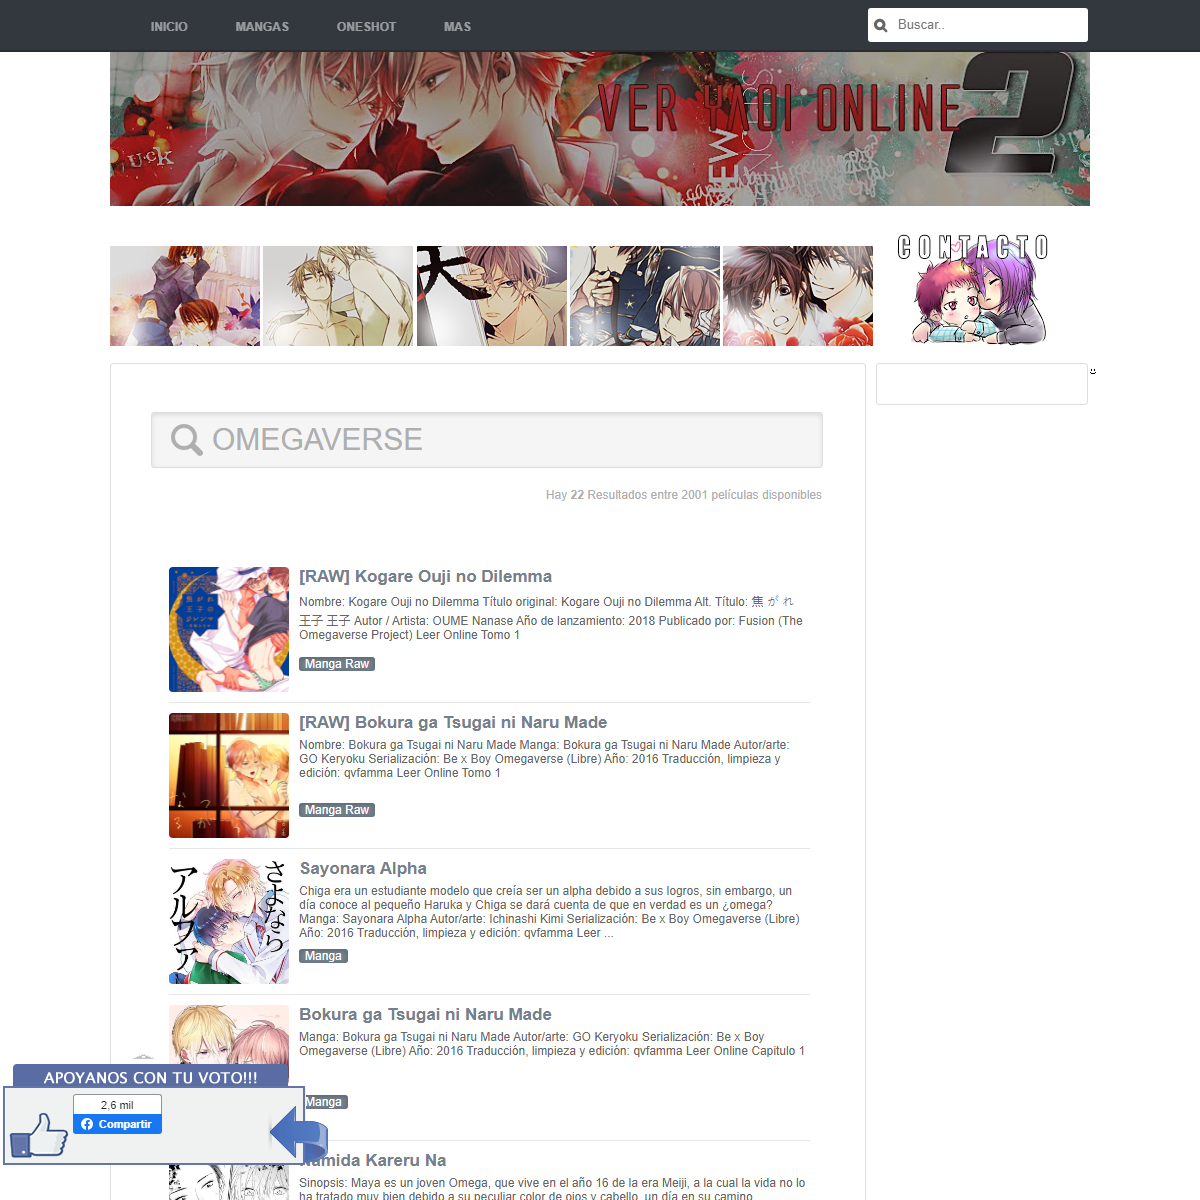 A complete backup of http://veryaoionline.net/page/2?s=omegaverse